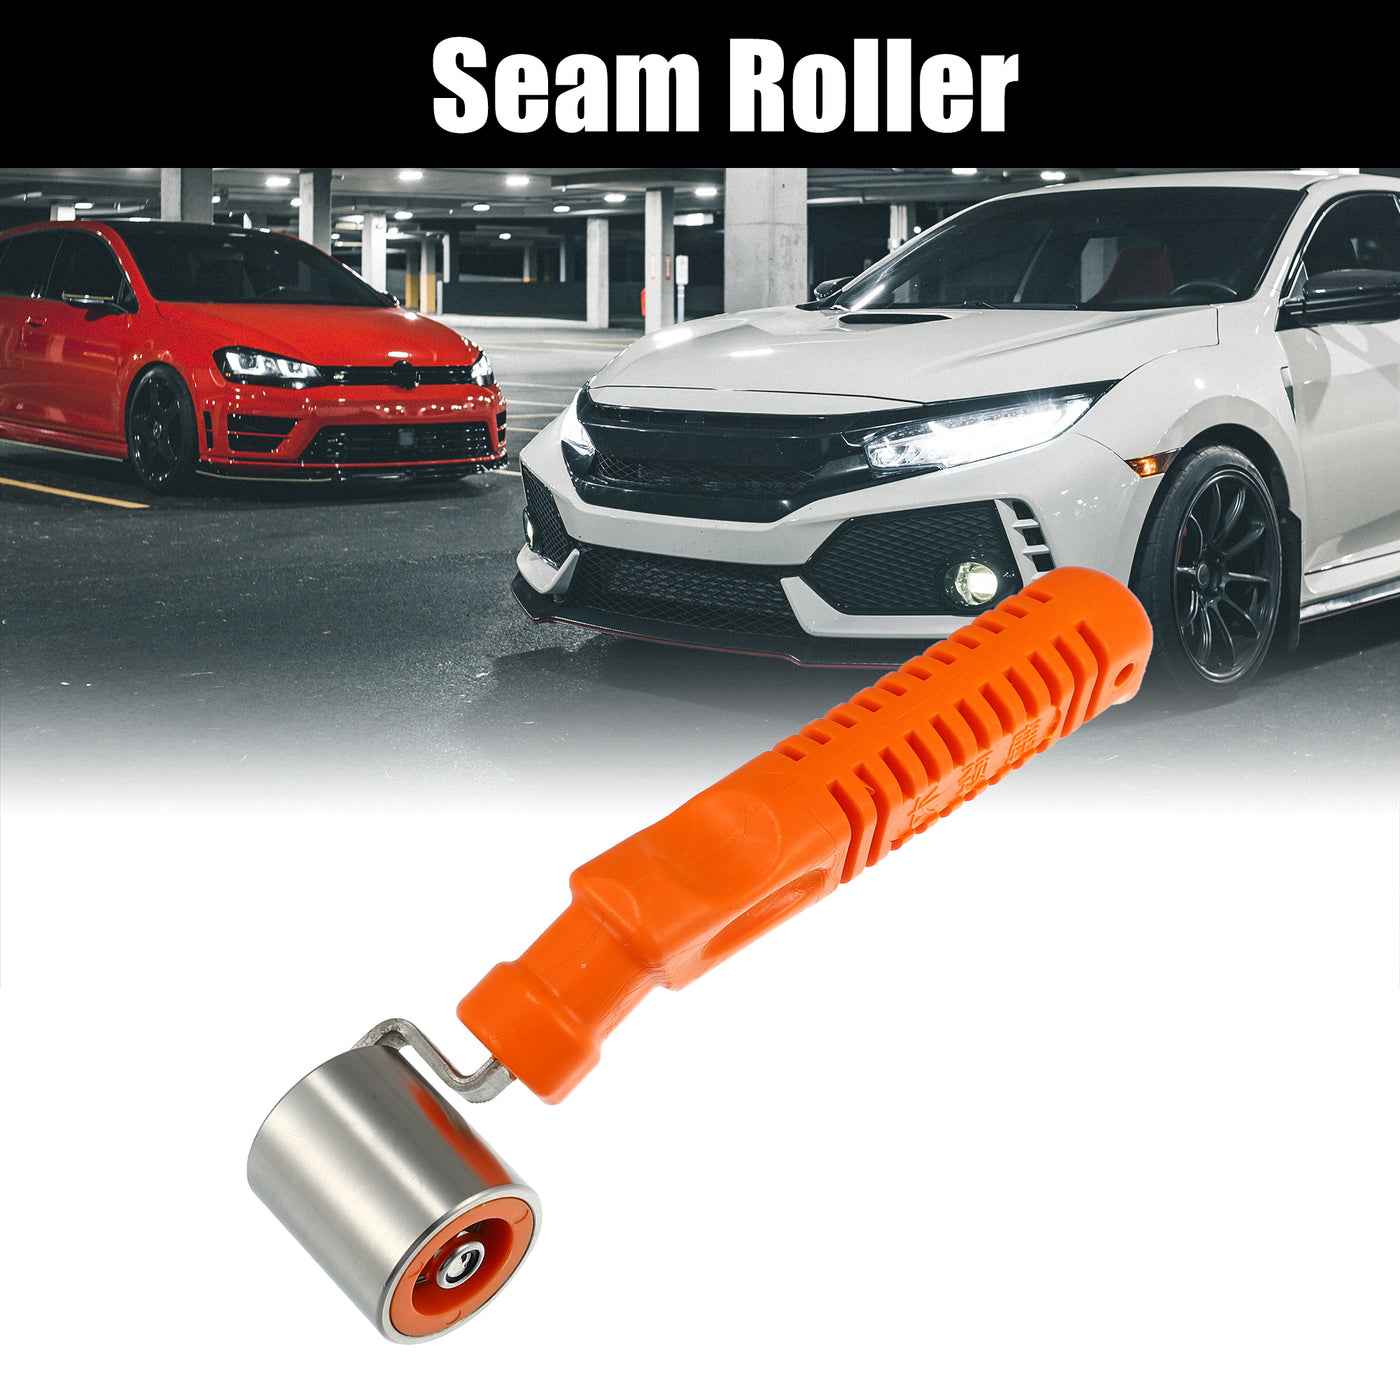 X AUTOHAUX 3.5cm Steel Seam Roller Wallpaper Car Audio Sound Deadening Application Roller Tool with Anti-Slip for Auto Noise Wheel Hand Pressure Roller Metal Plastic